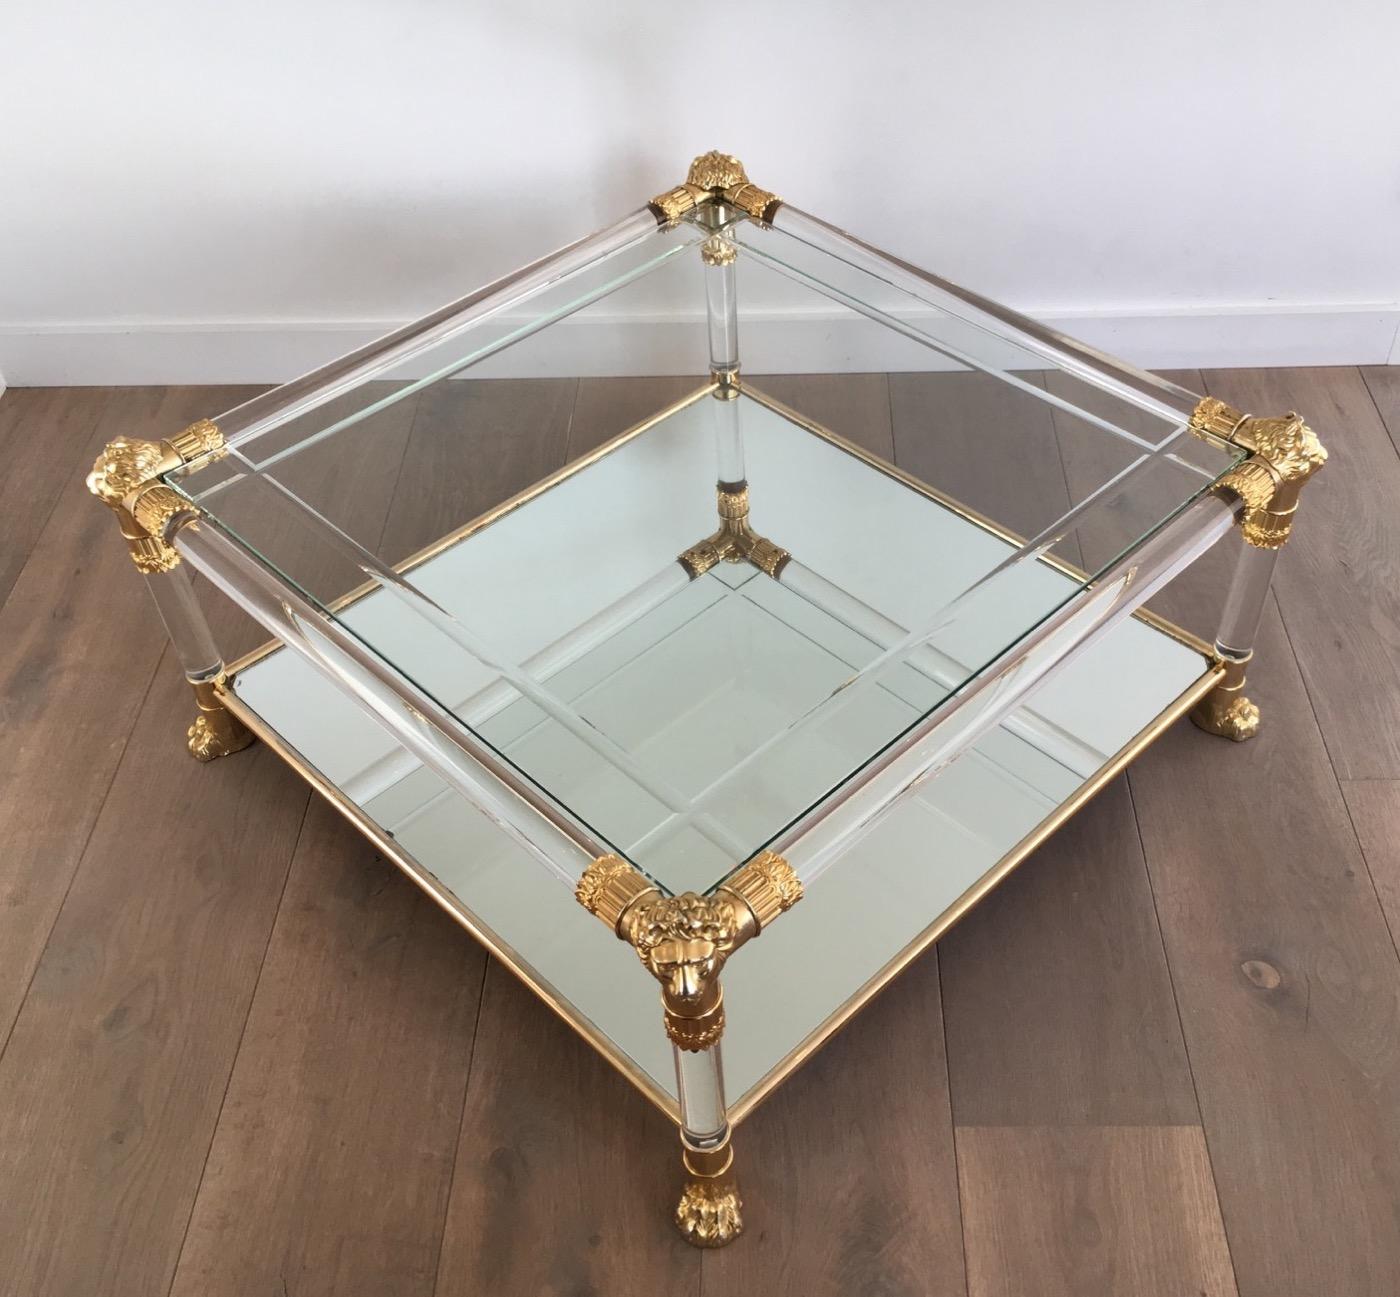 Square Lucite coffee table with gilt plastic lion heads and claw feet. The top shelf is made of engraved glass and the bottom shelf is a mirror. French, circa 1970.